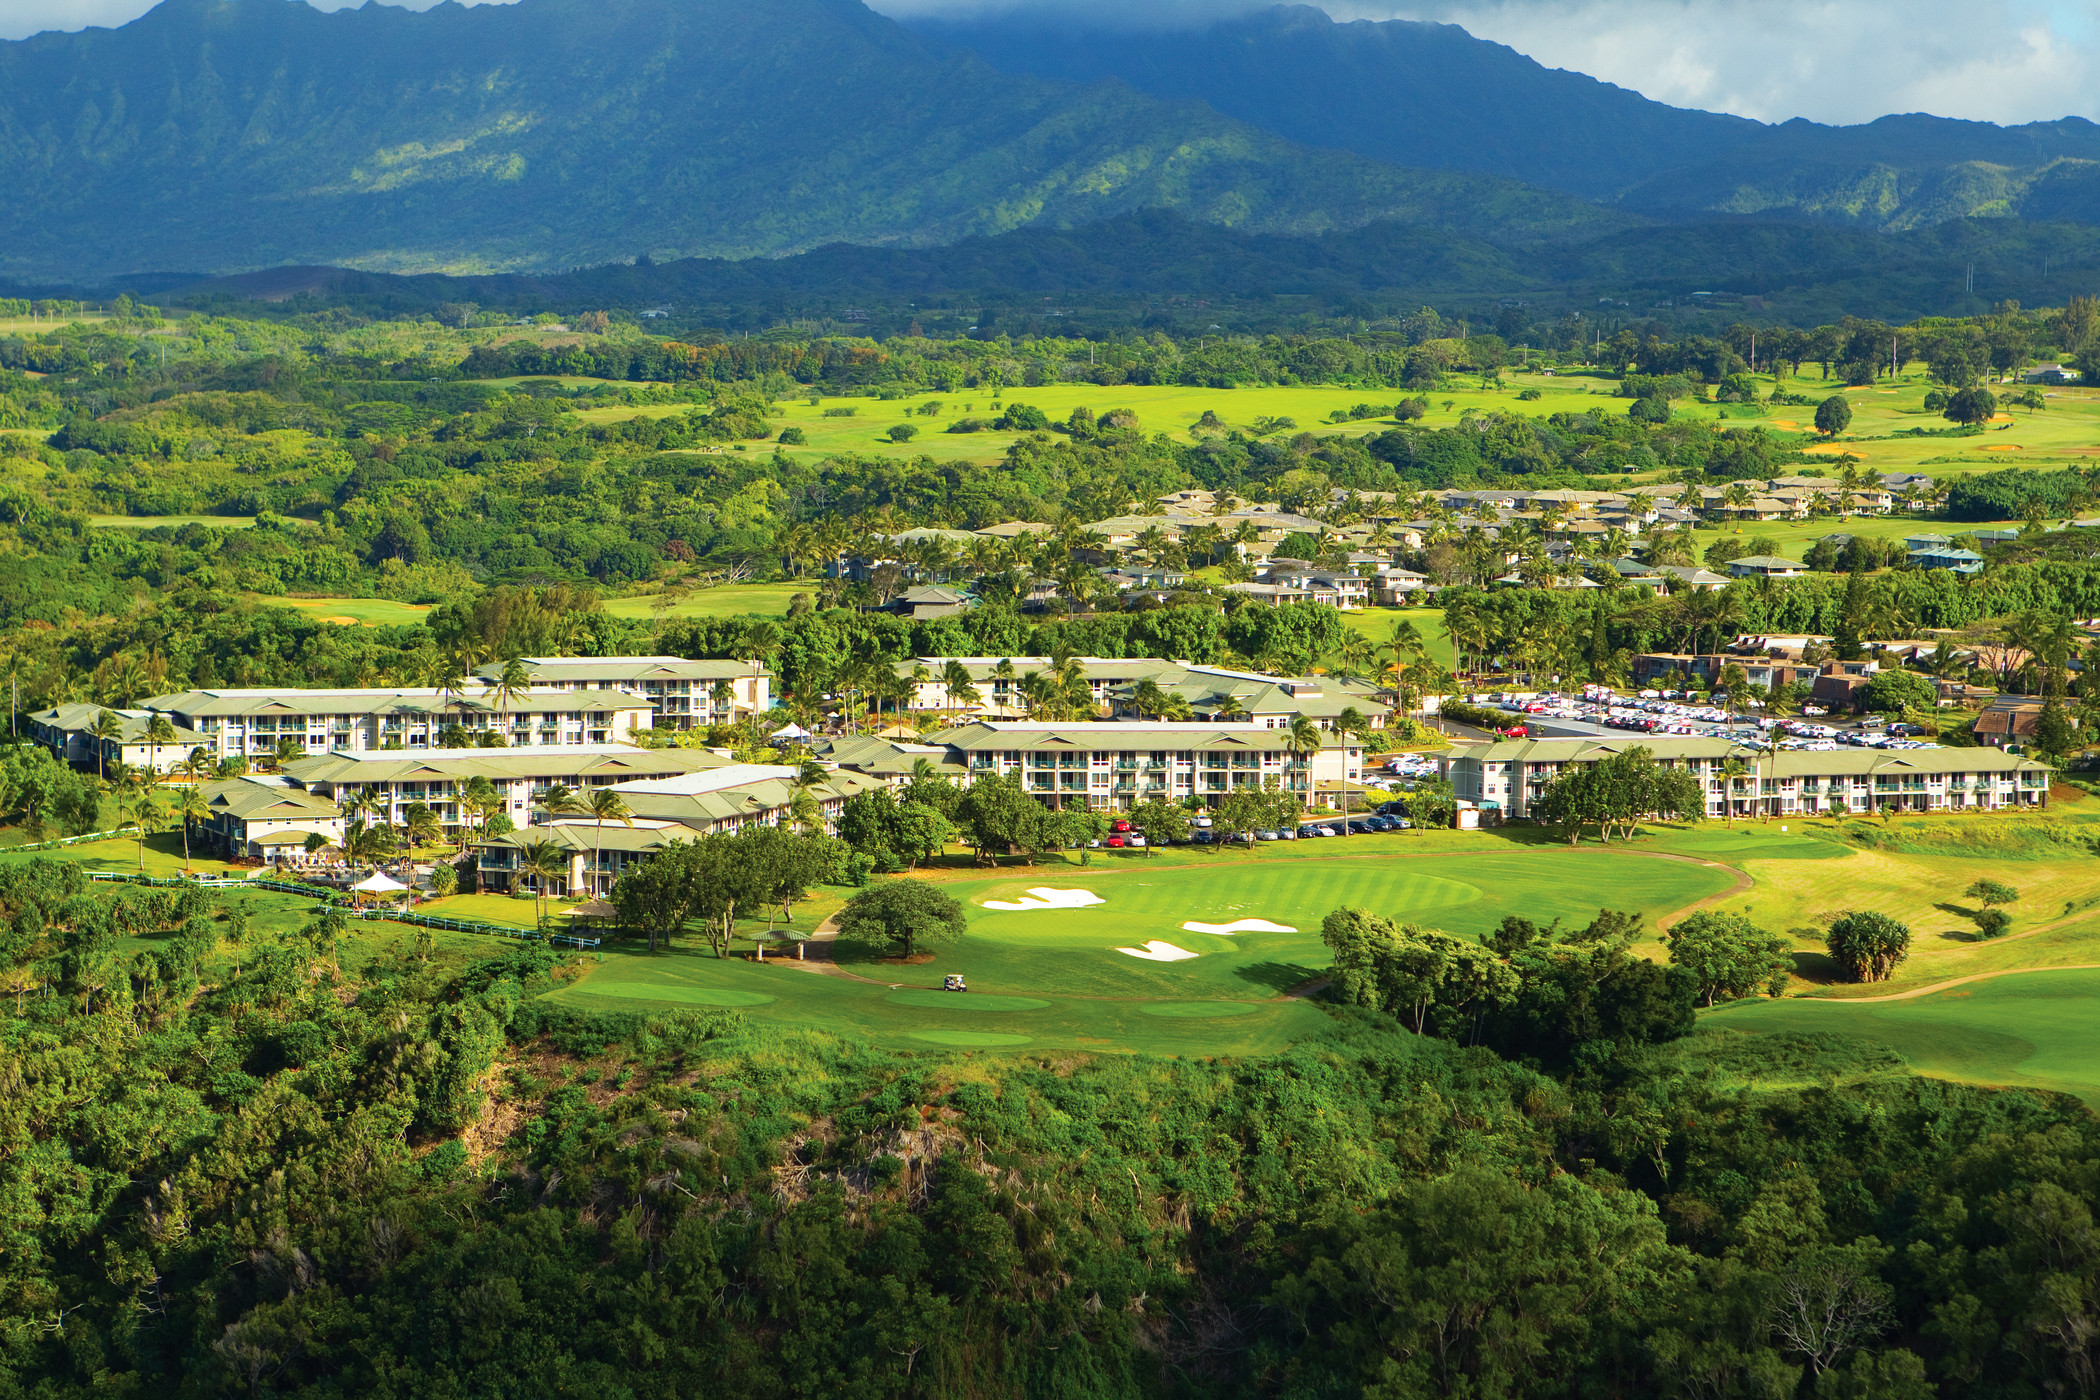 The Westin Princeville Ocean Resort Villas, with 346 villa accommodations, is among the largest resorts on Kauai and thus one of the largest consumers of energy.